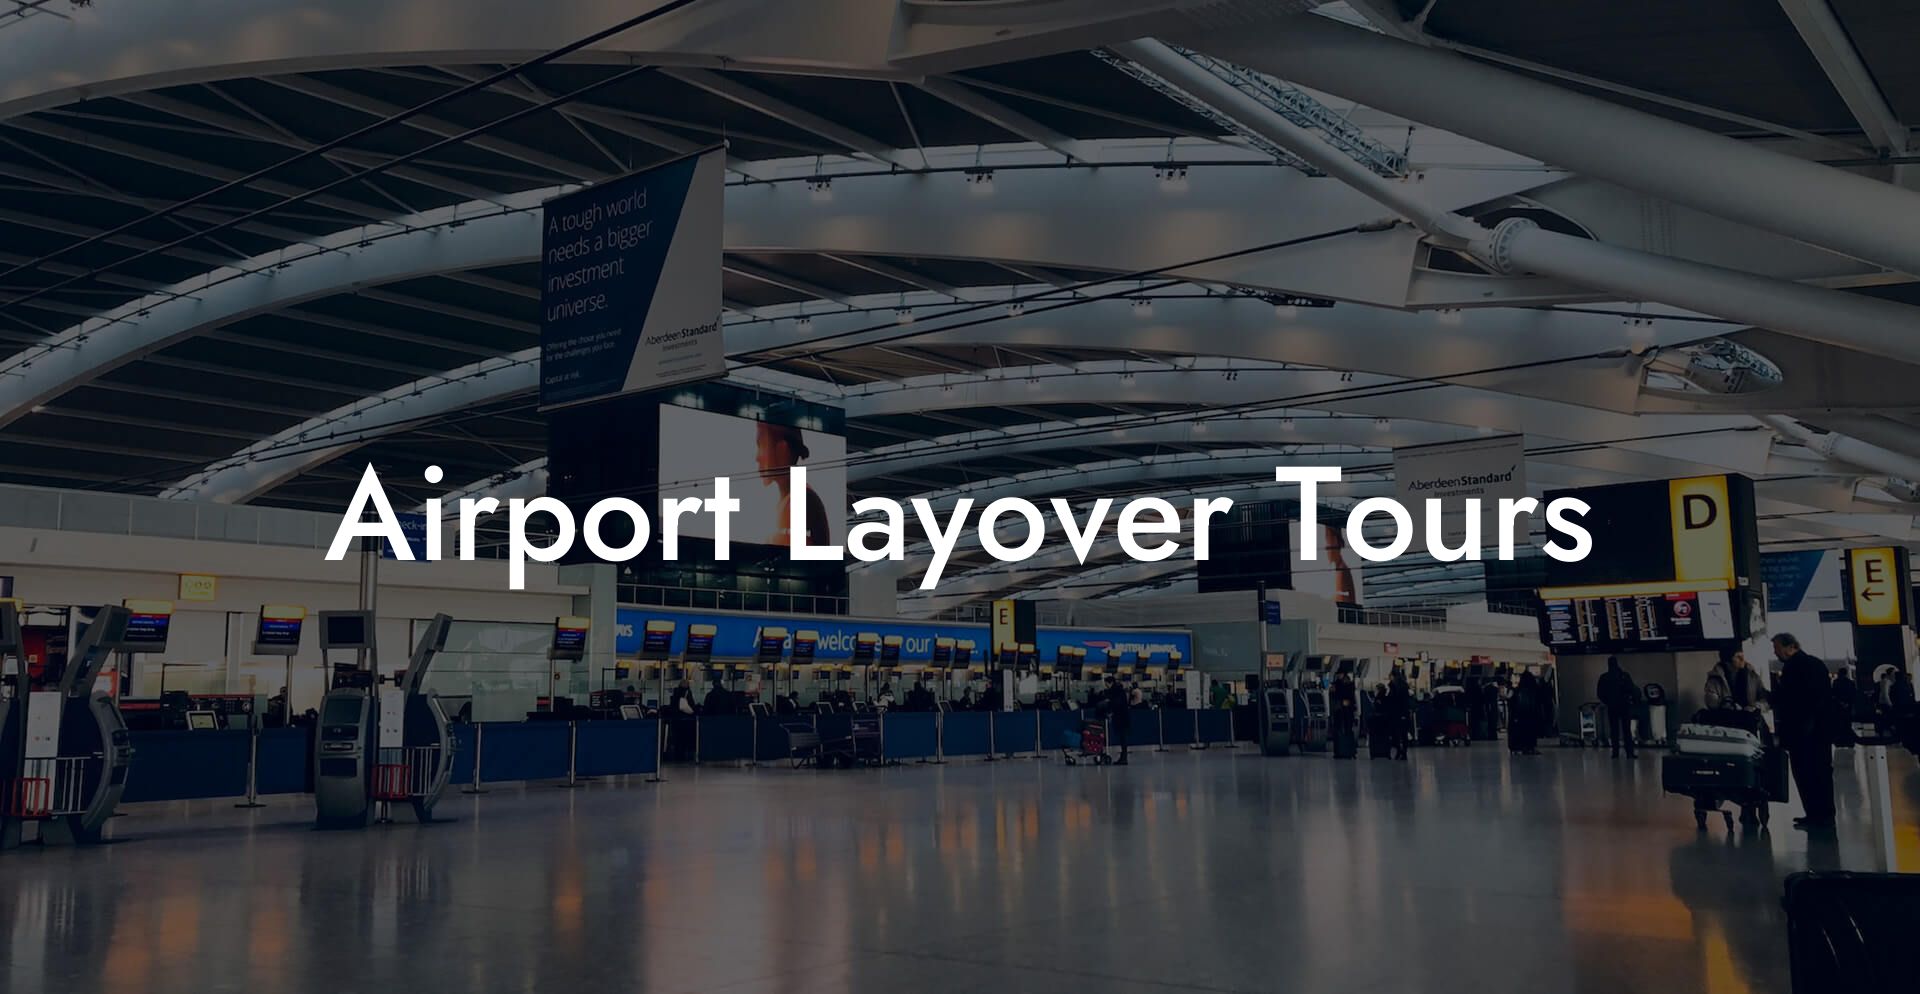 Airport Layover Tours